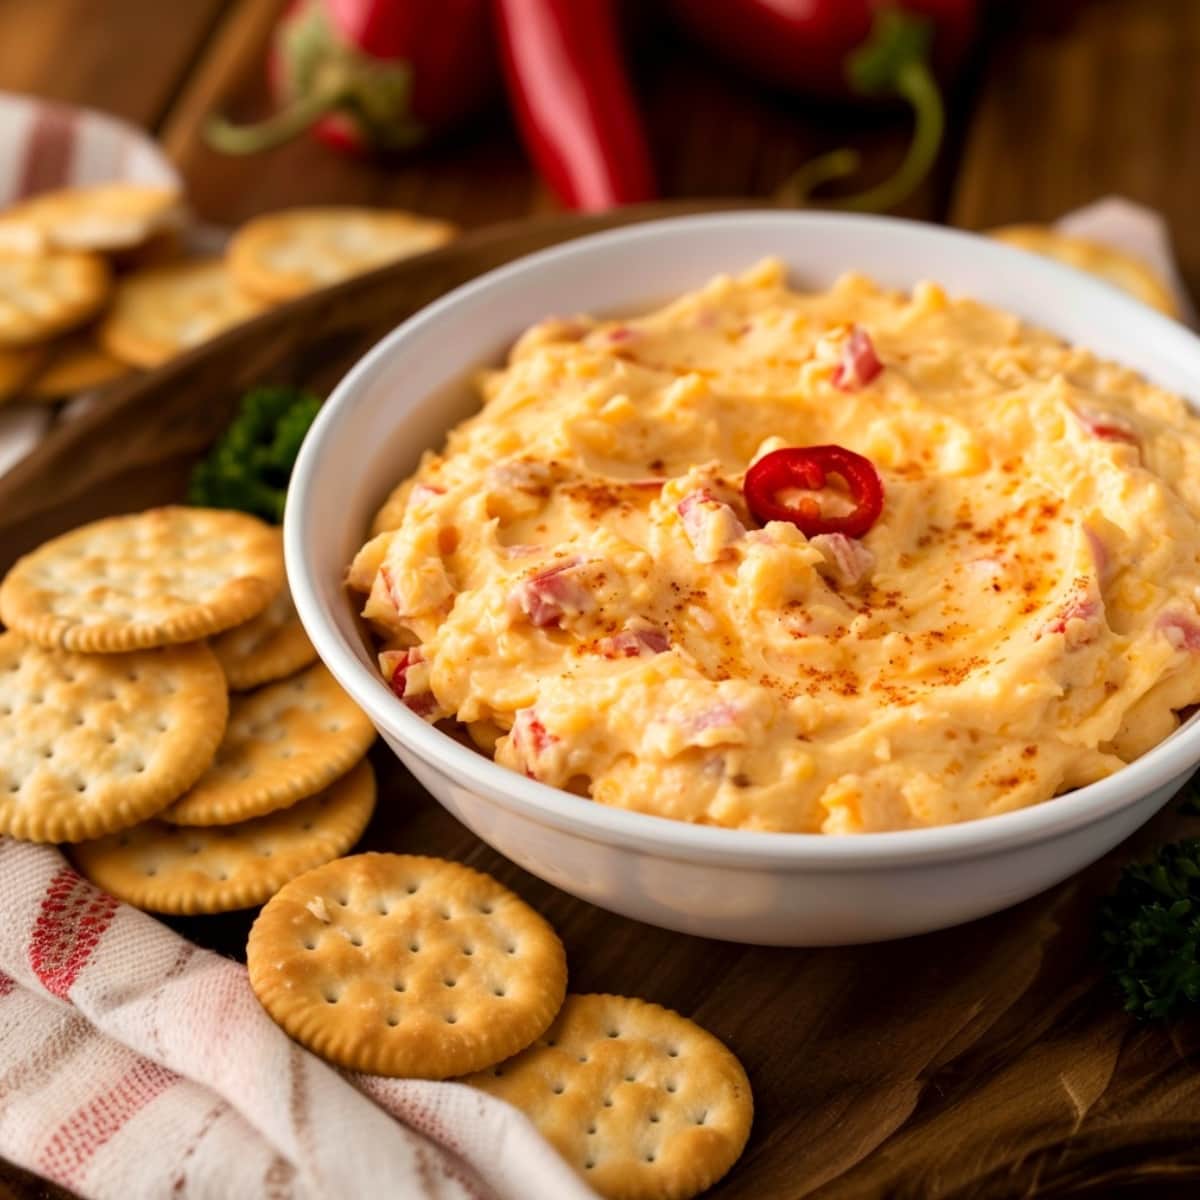 Homemade creamy pimento cheese with crackers in a wooden board